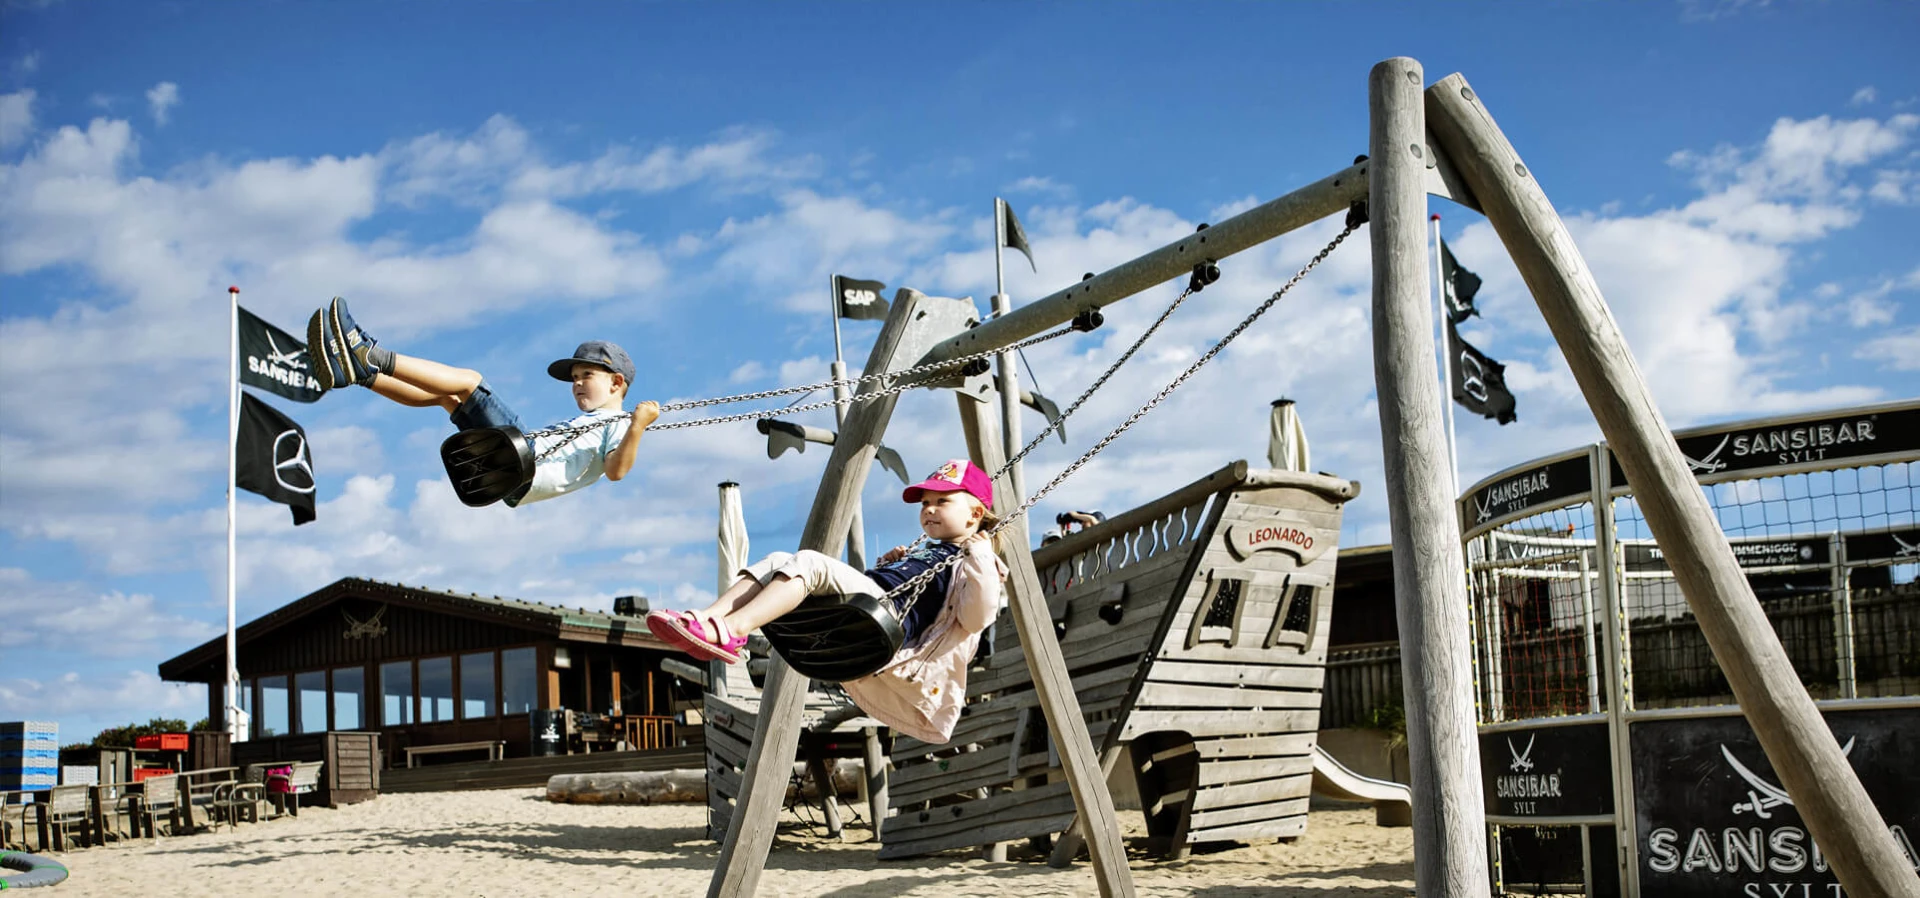 Children playing on a wooden swing set